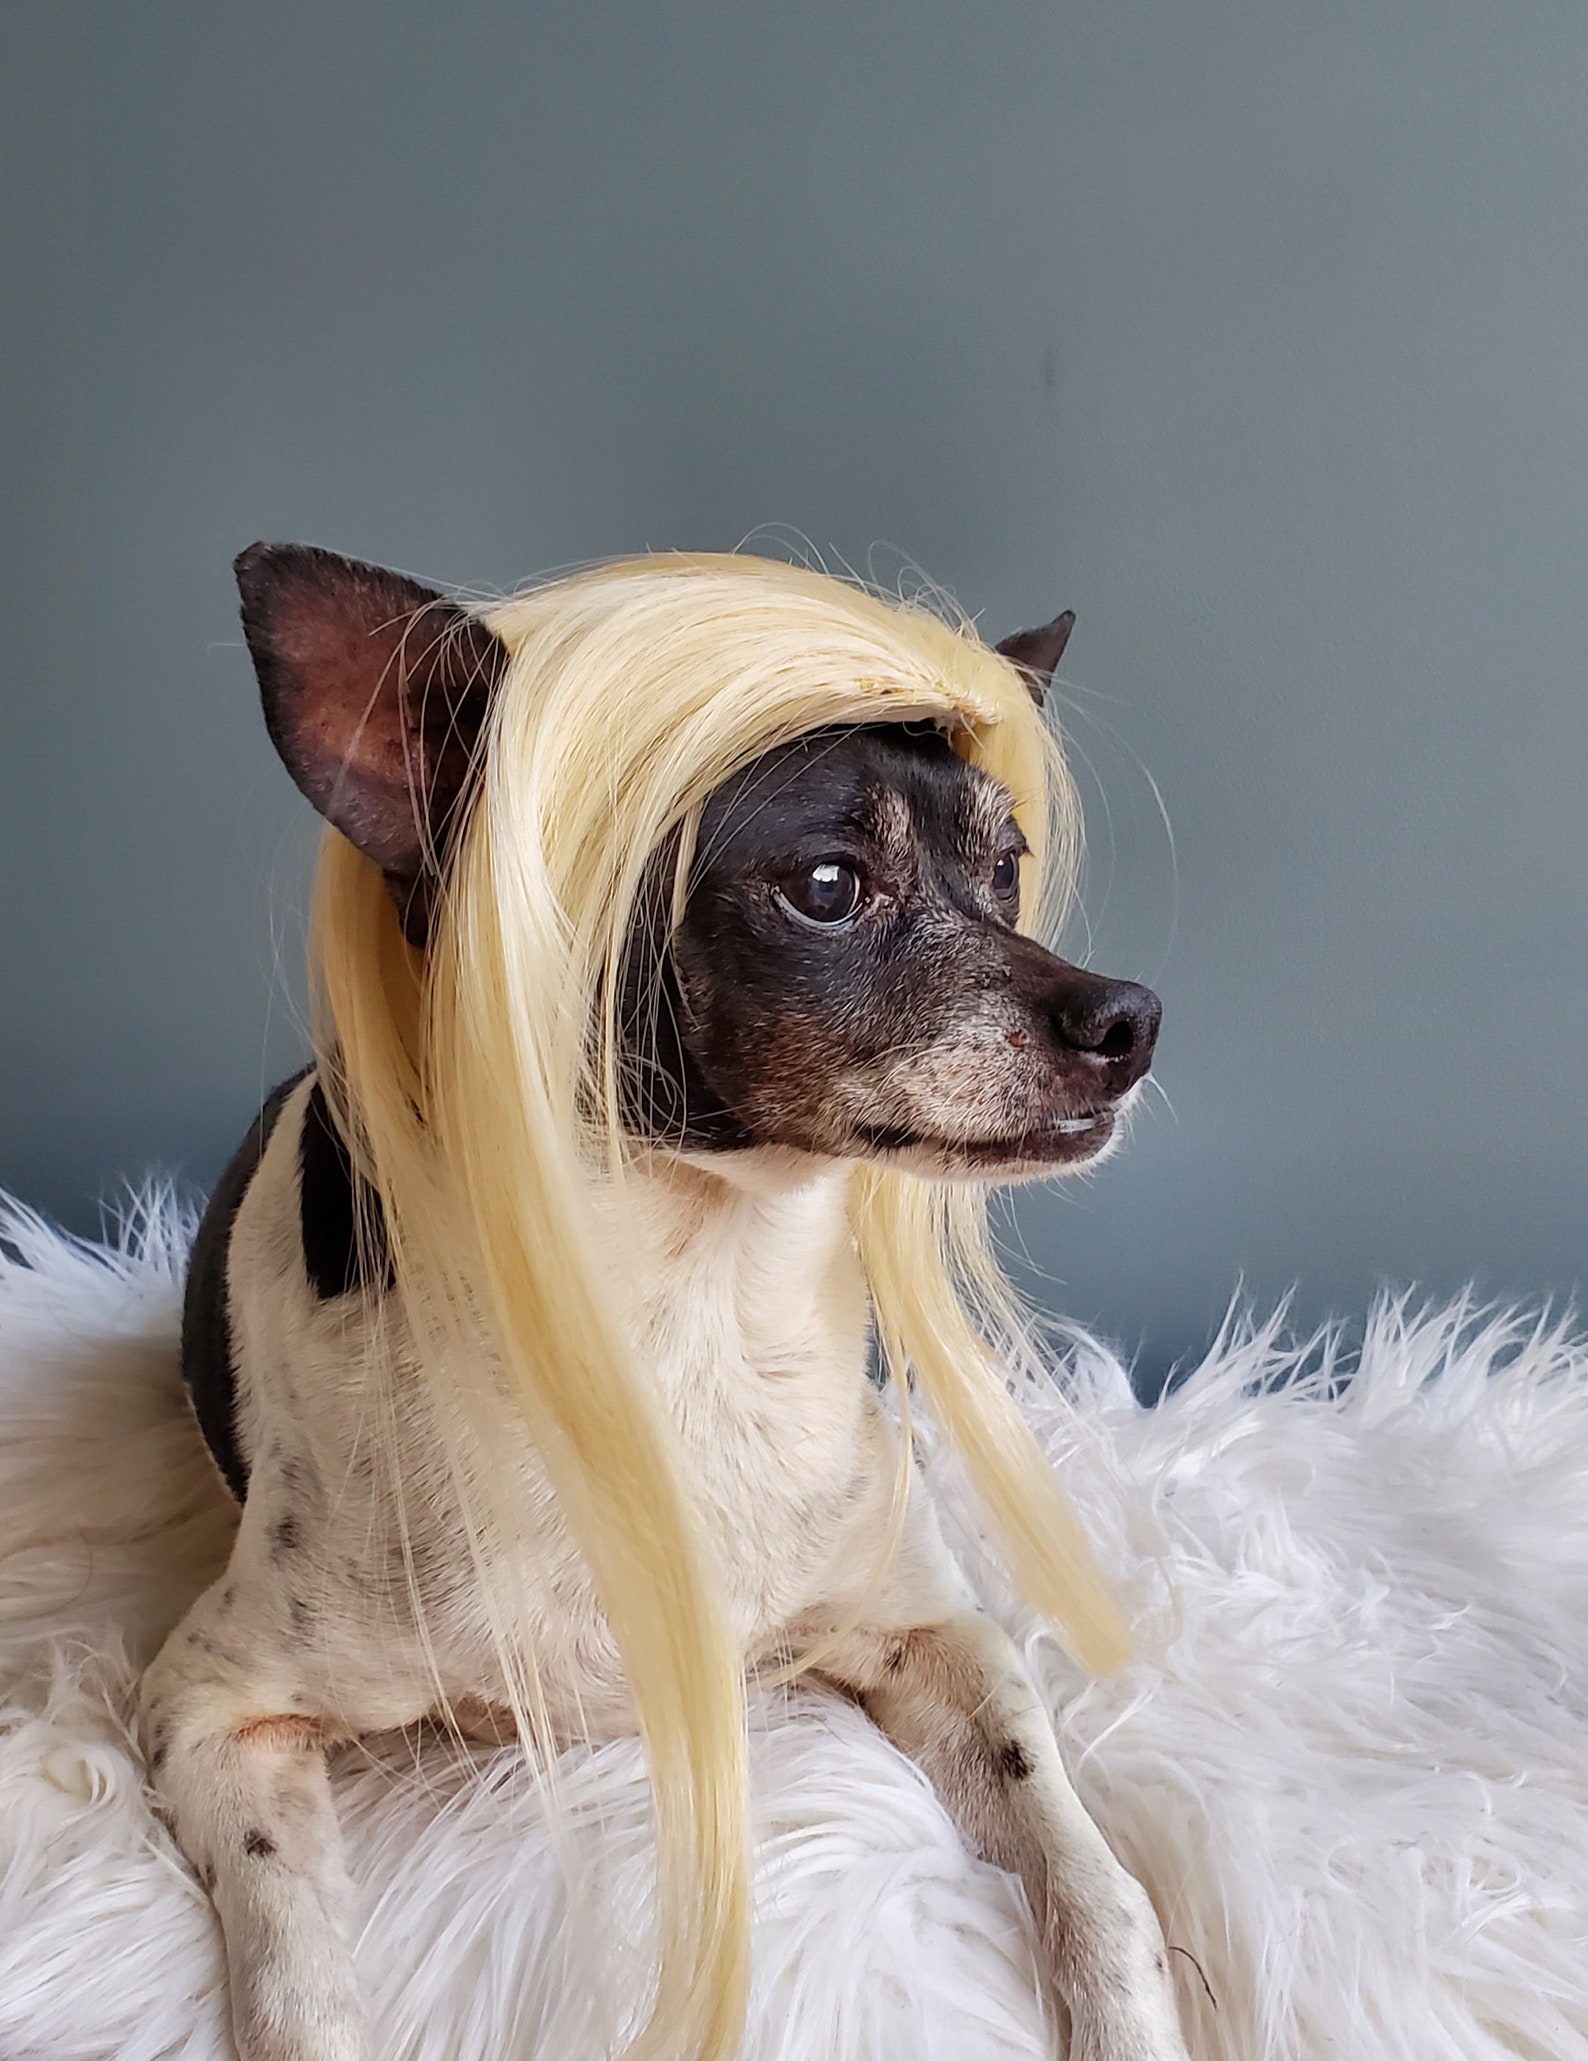 Pet wig blond color for dog or cat / Halloween costume / | Etsy